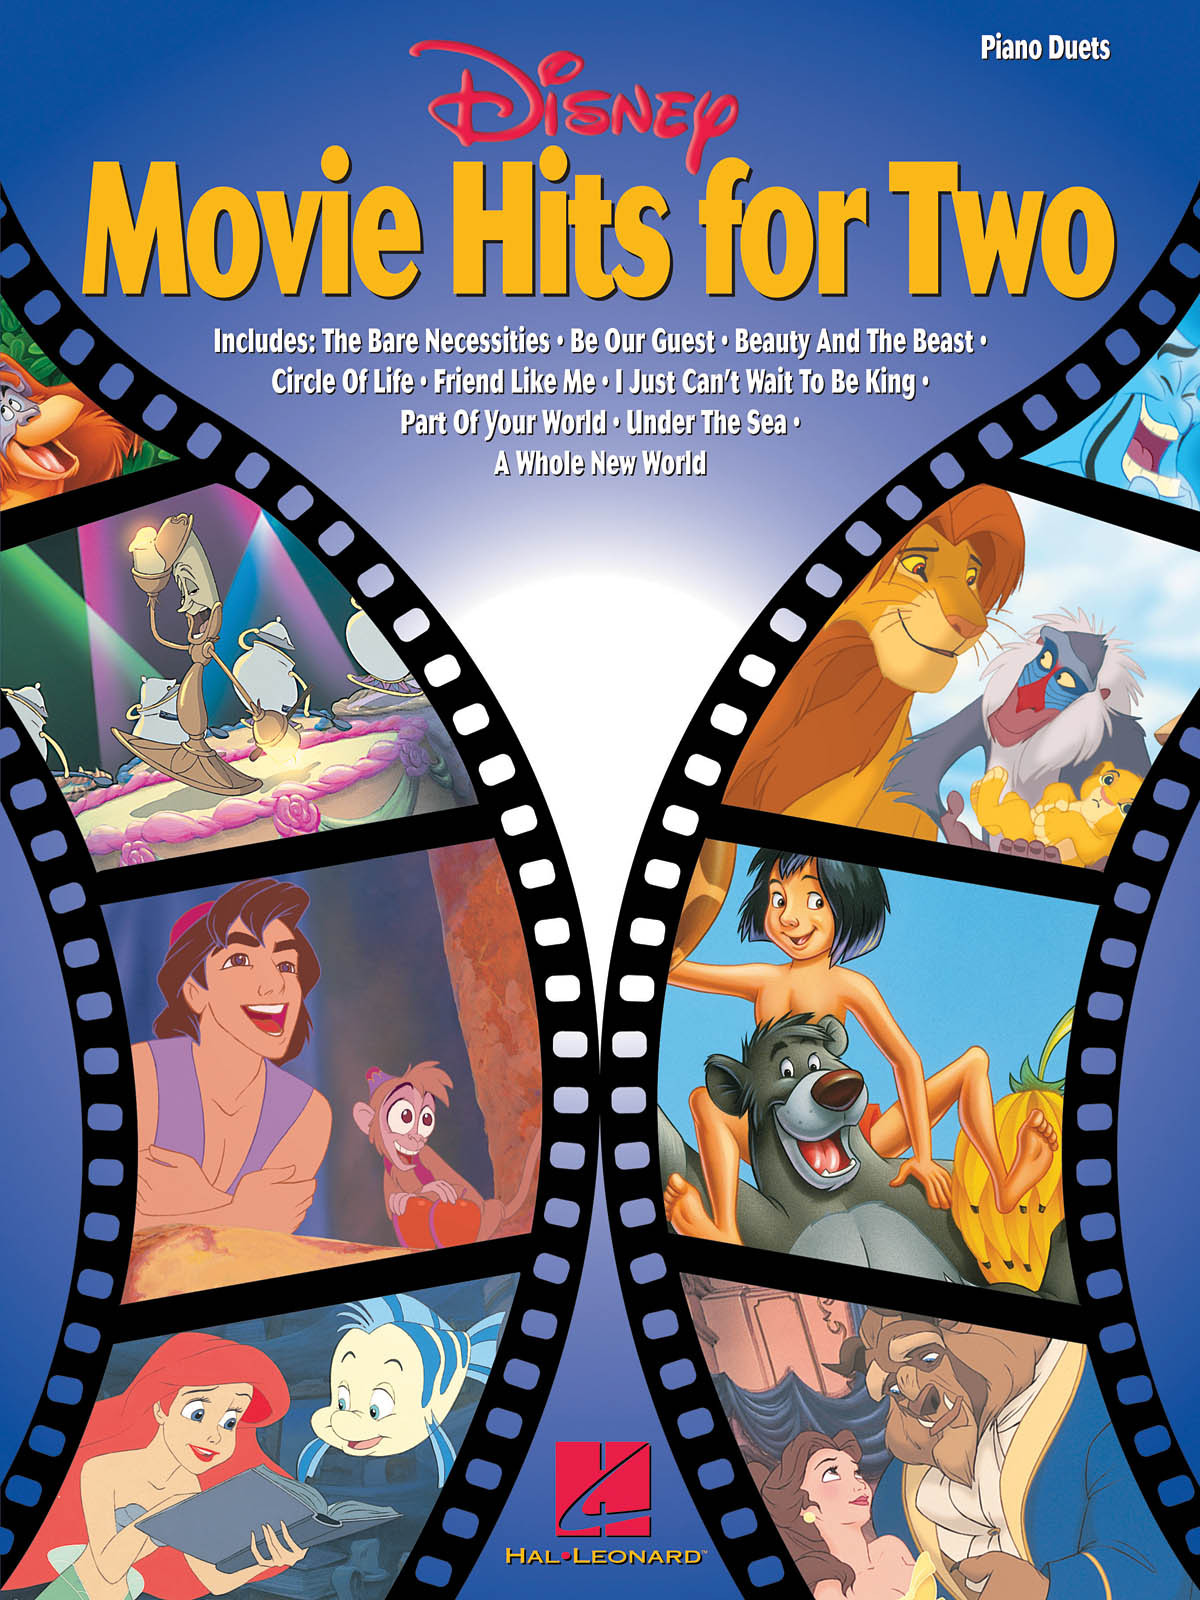 Disney Movie Hits for Two...